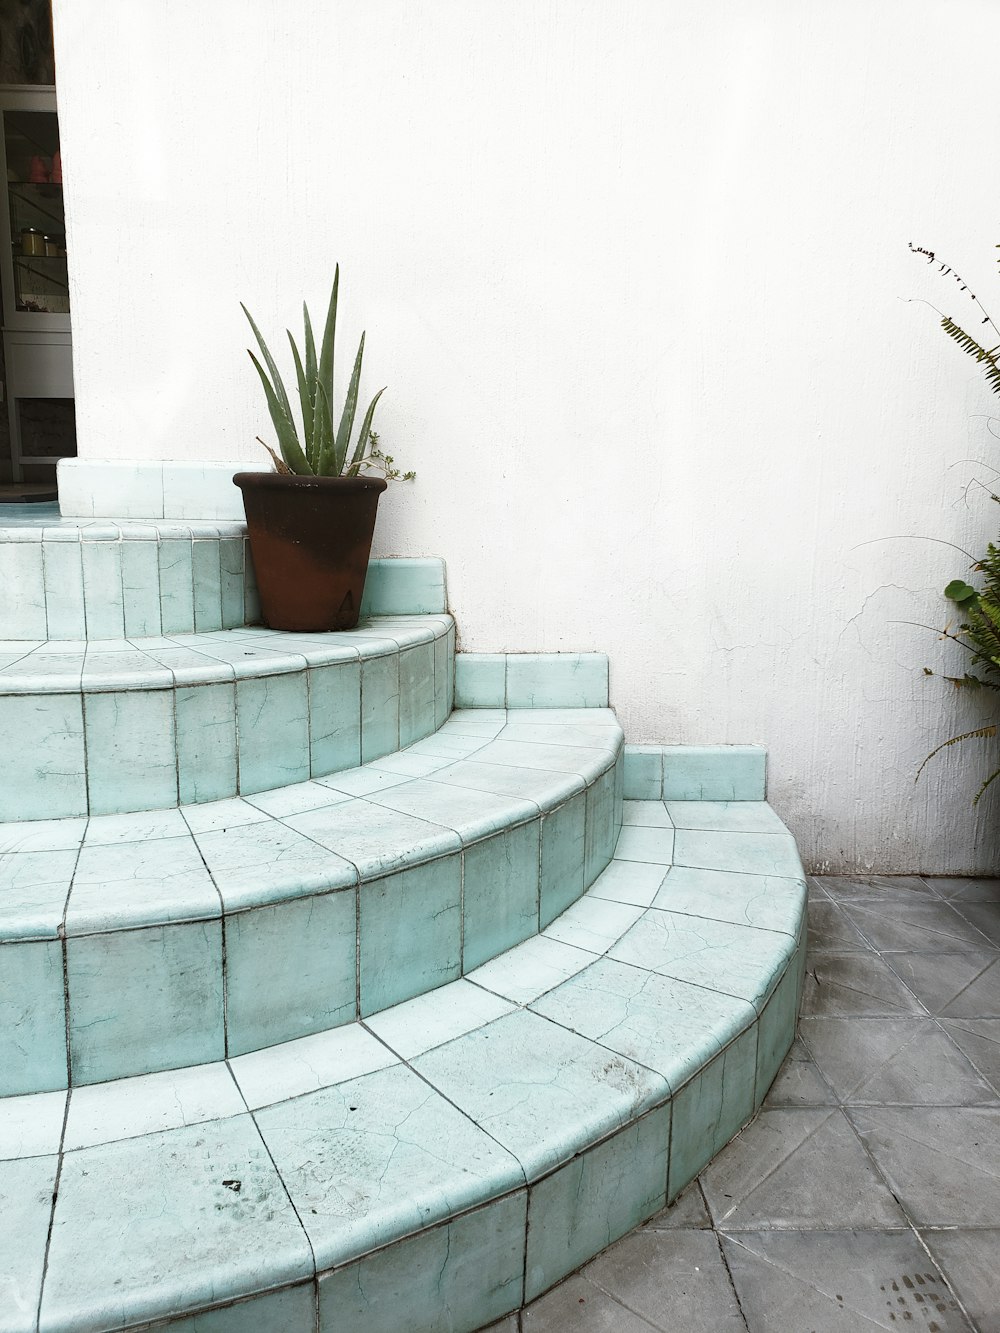 green plant on gray concrete stairs